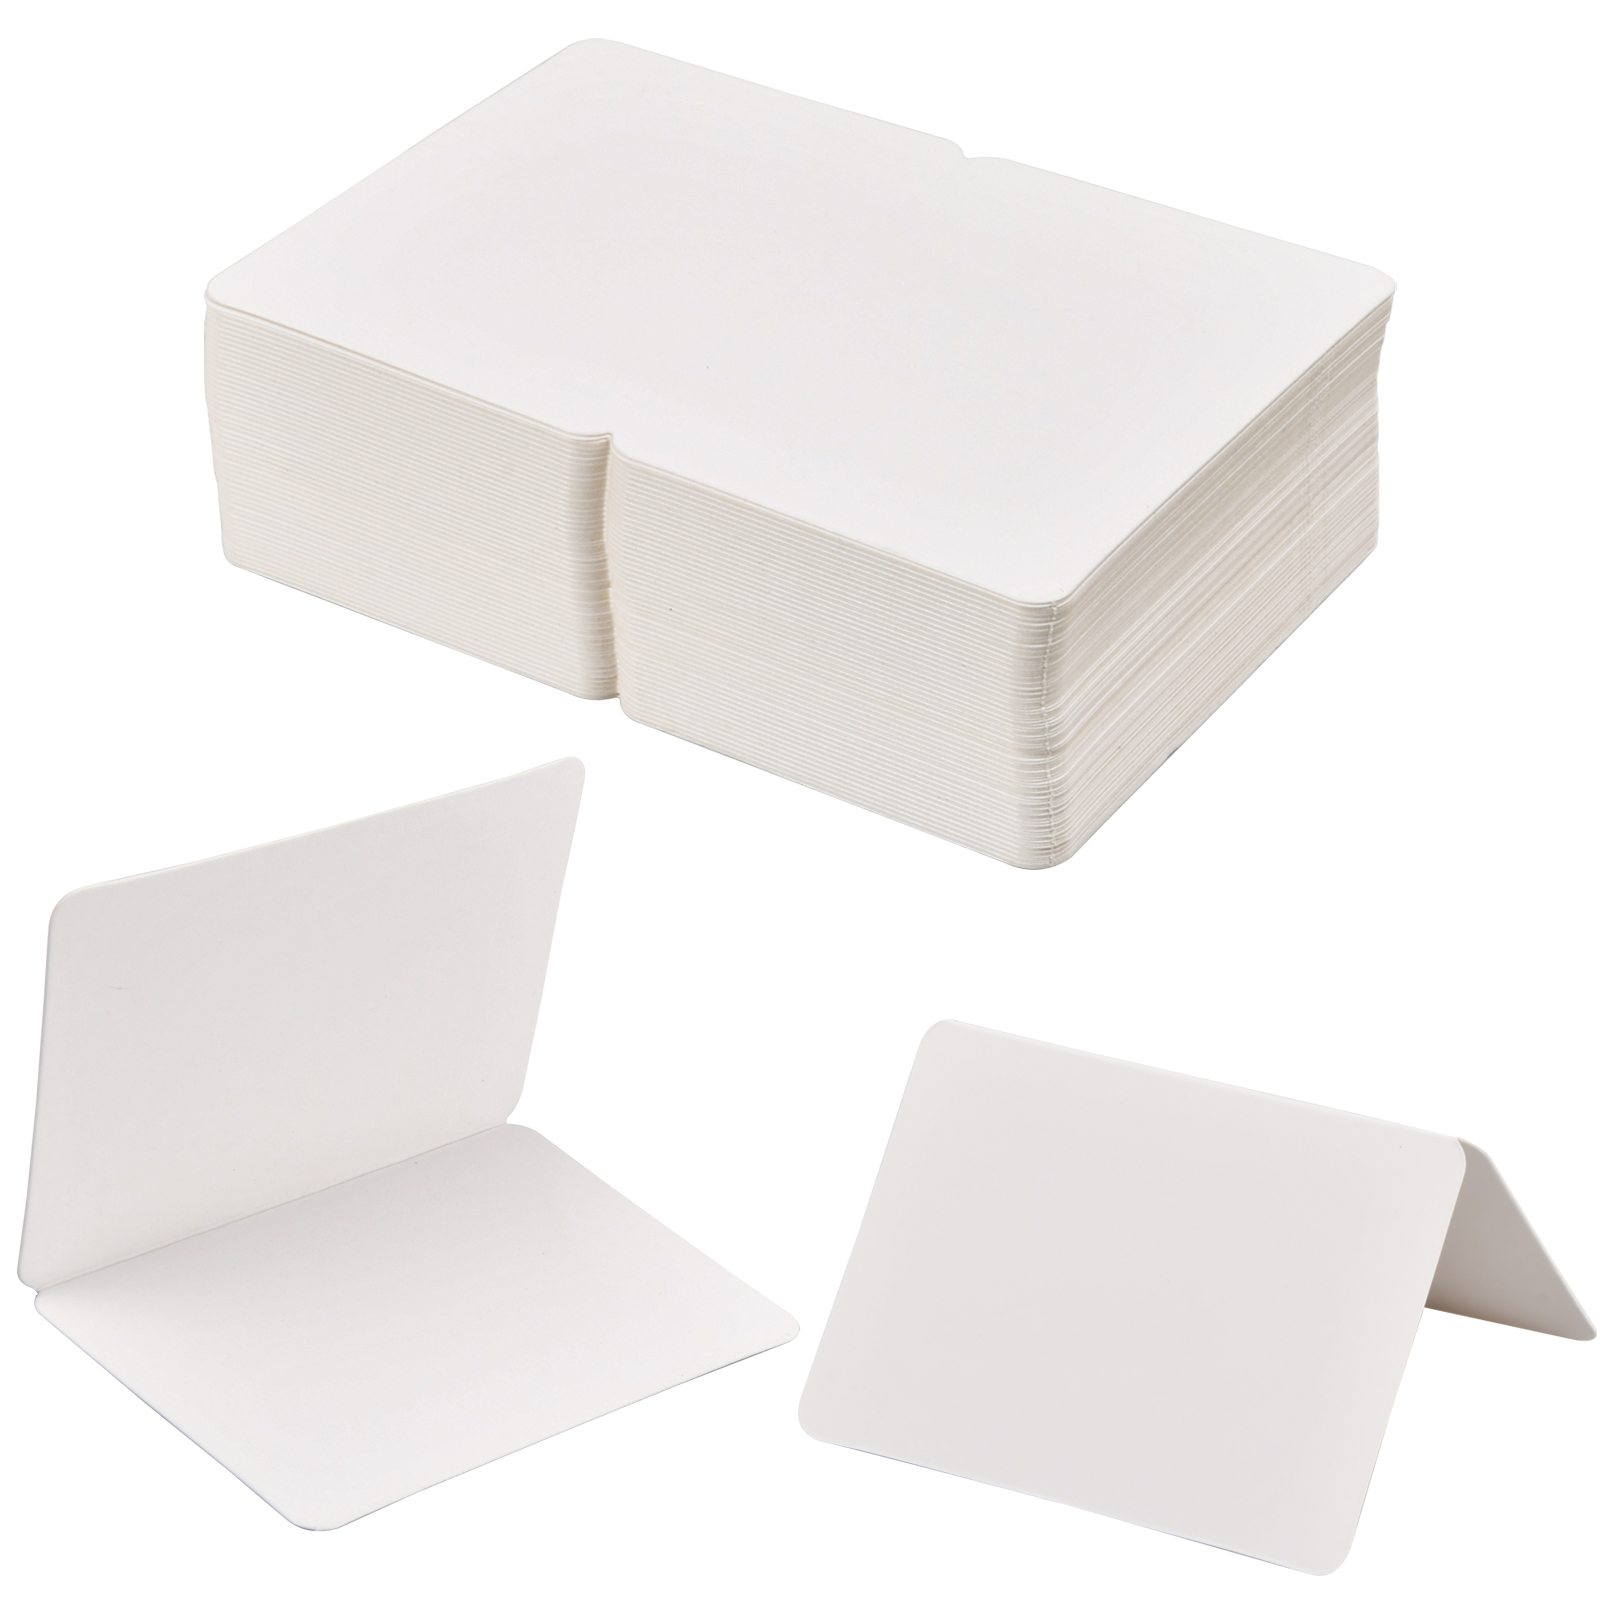 60 Pack 5x7 Cardstock Paper White Blank Cardstock 250GSM Thick